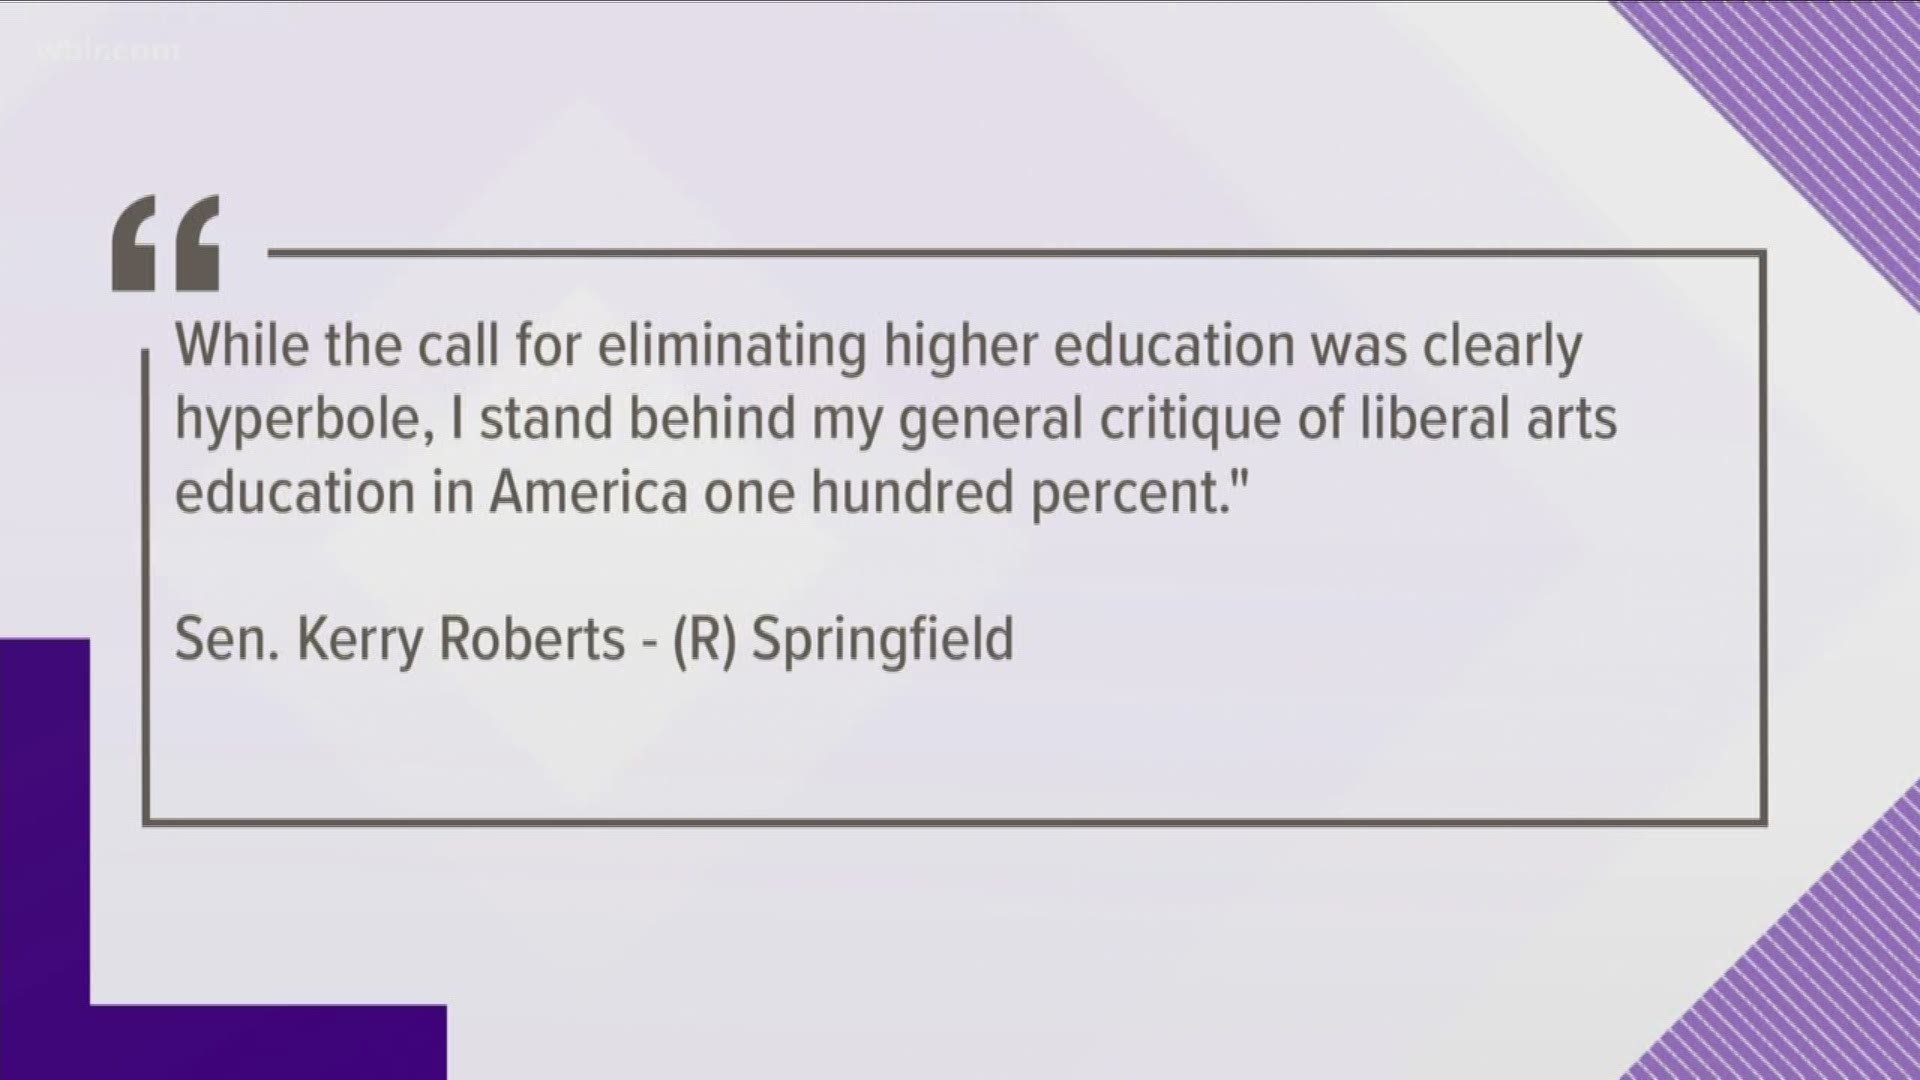 In a statement Tuesday, Roberts said it was a joke but stands behinds his critique of liberal arts education.